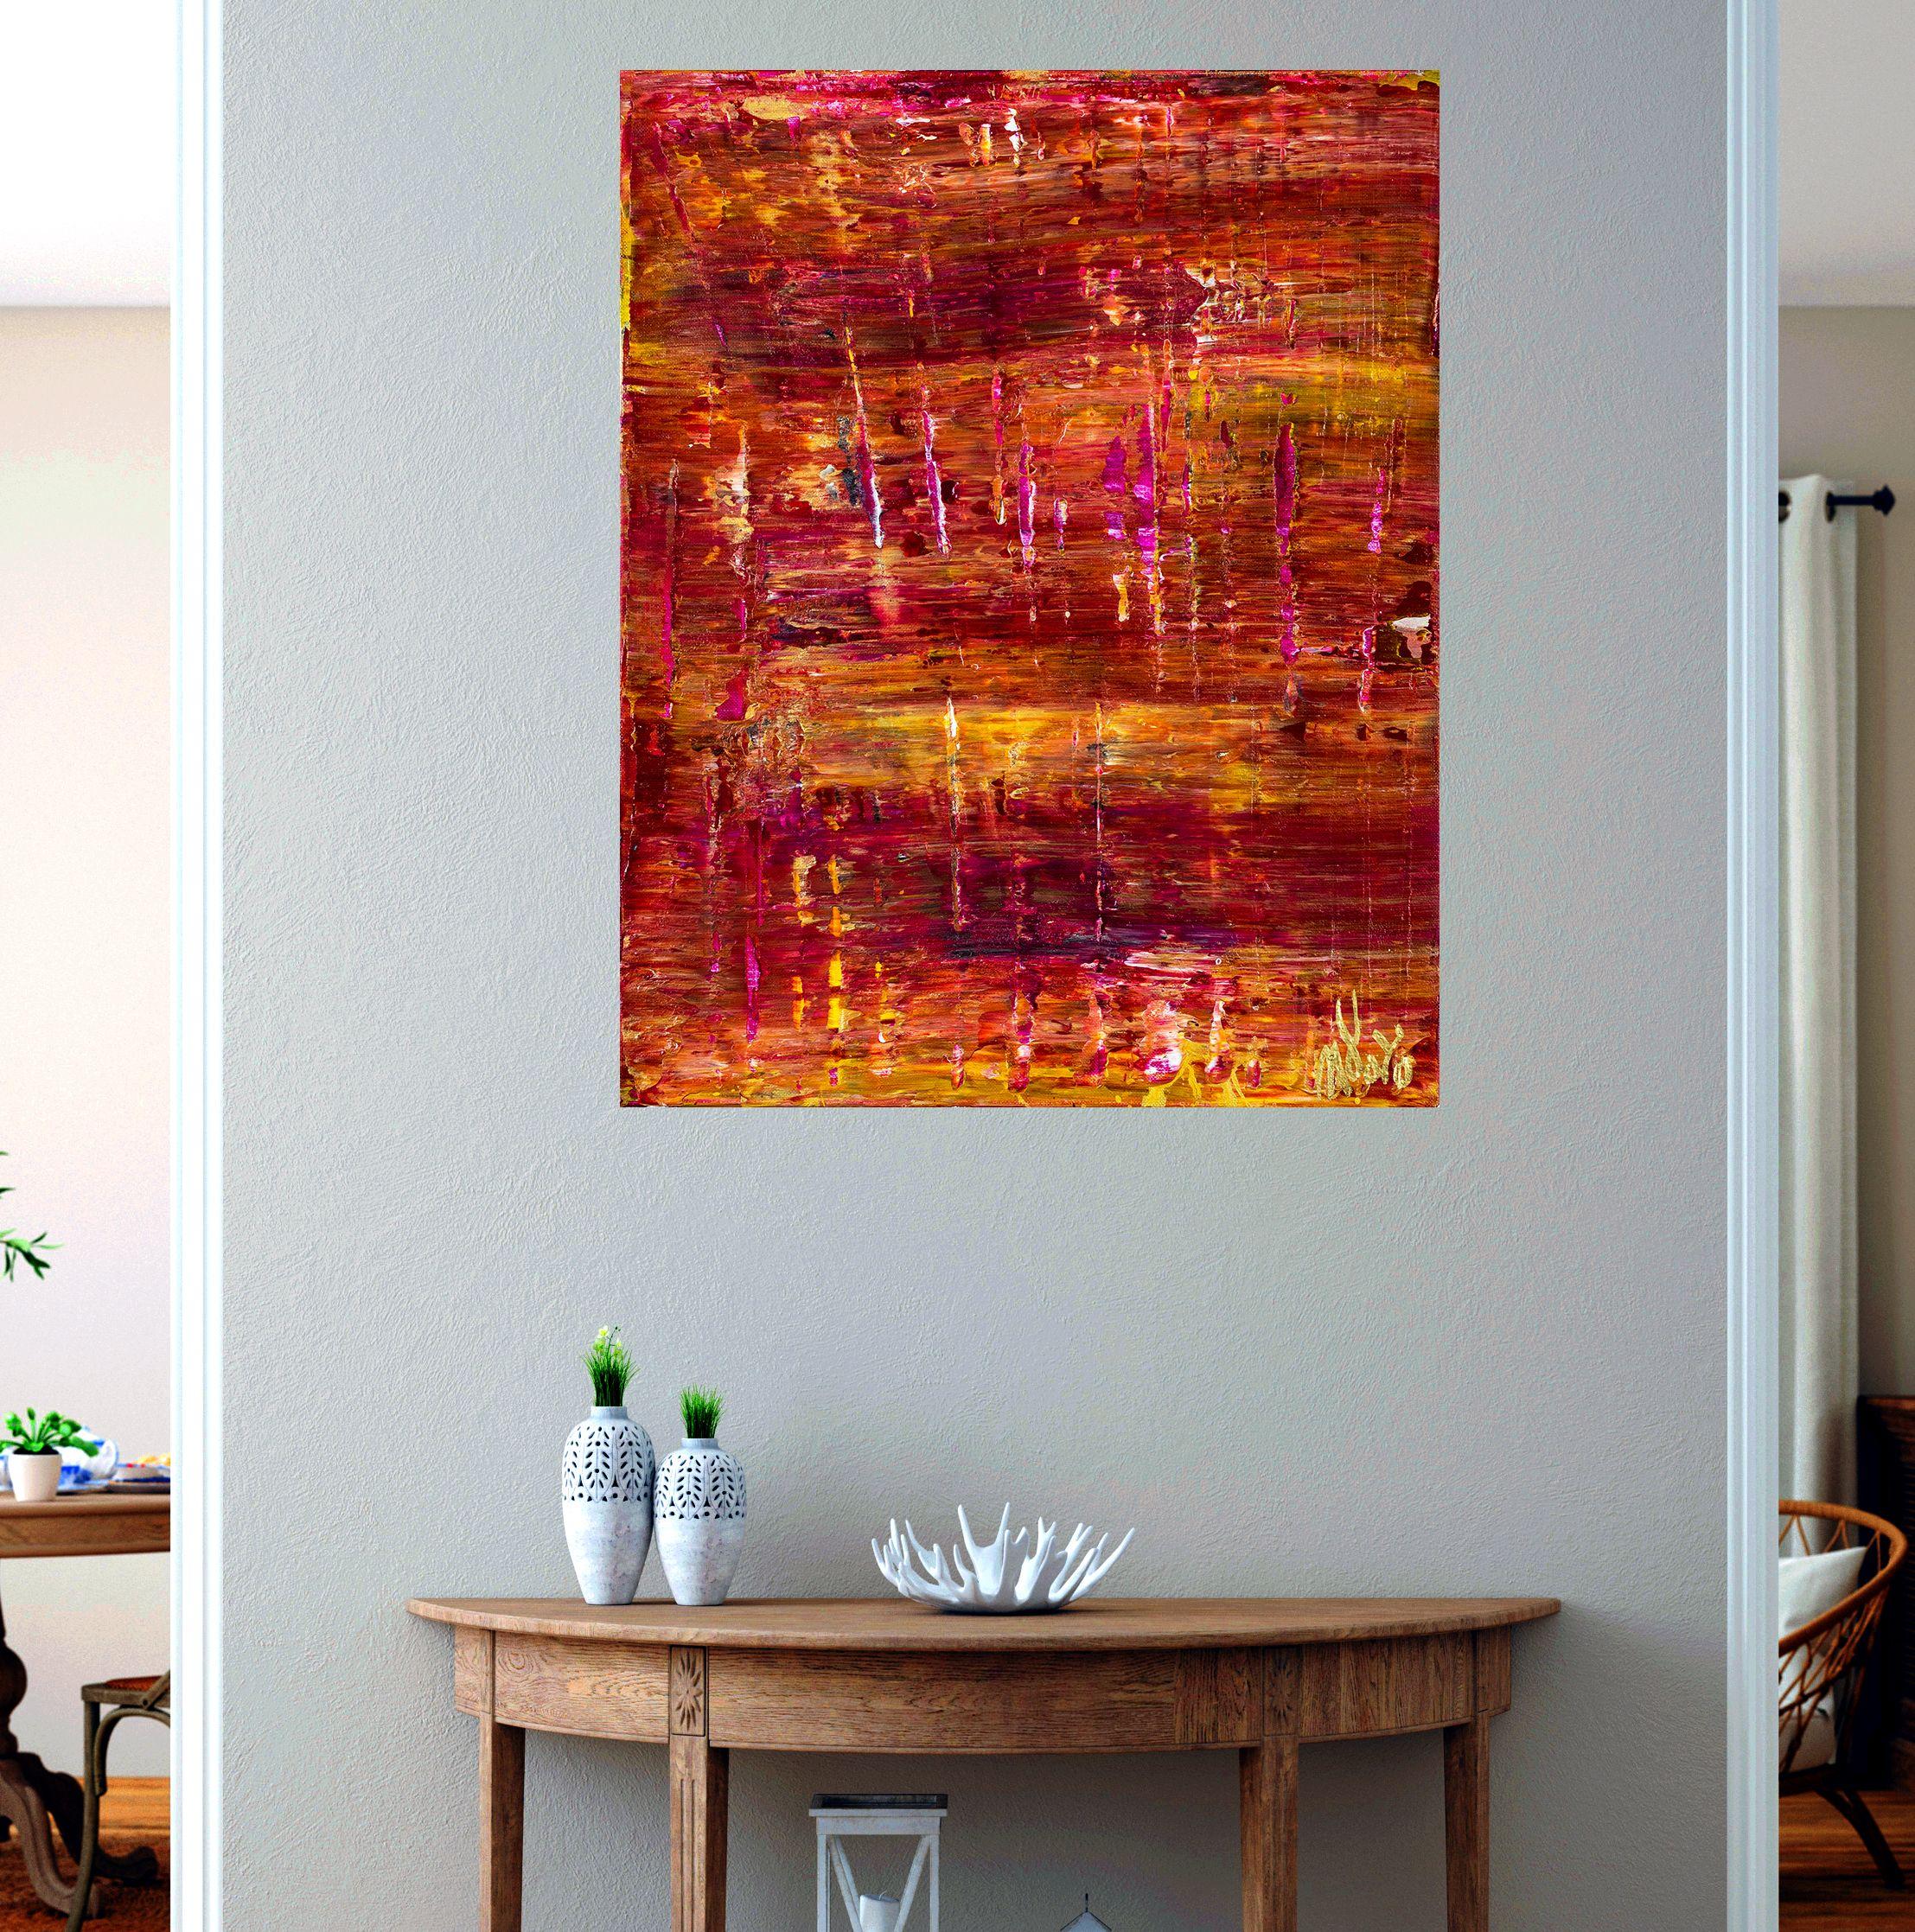 abstract minimalist painting  acrylic on canvas    This artwork was created layering and blending layers of red, orange,pink, yellow with the idea of bringing the most depth and harmony to the forefront.    For this work I used a large palette knife